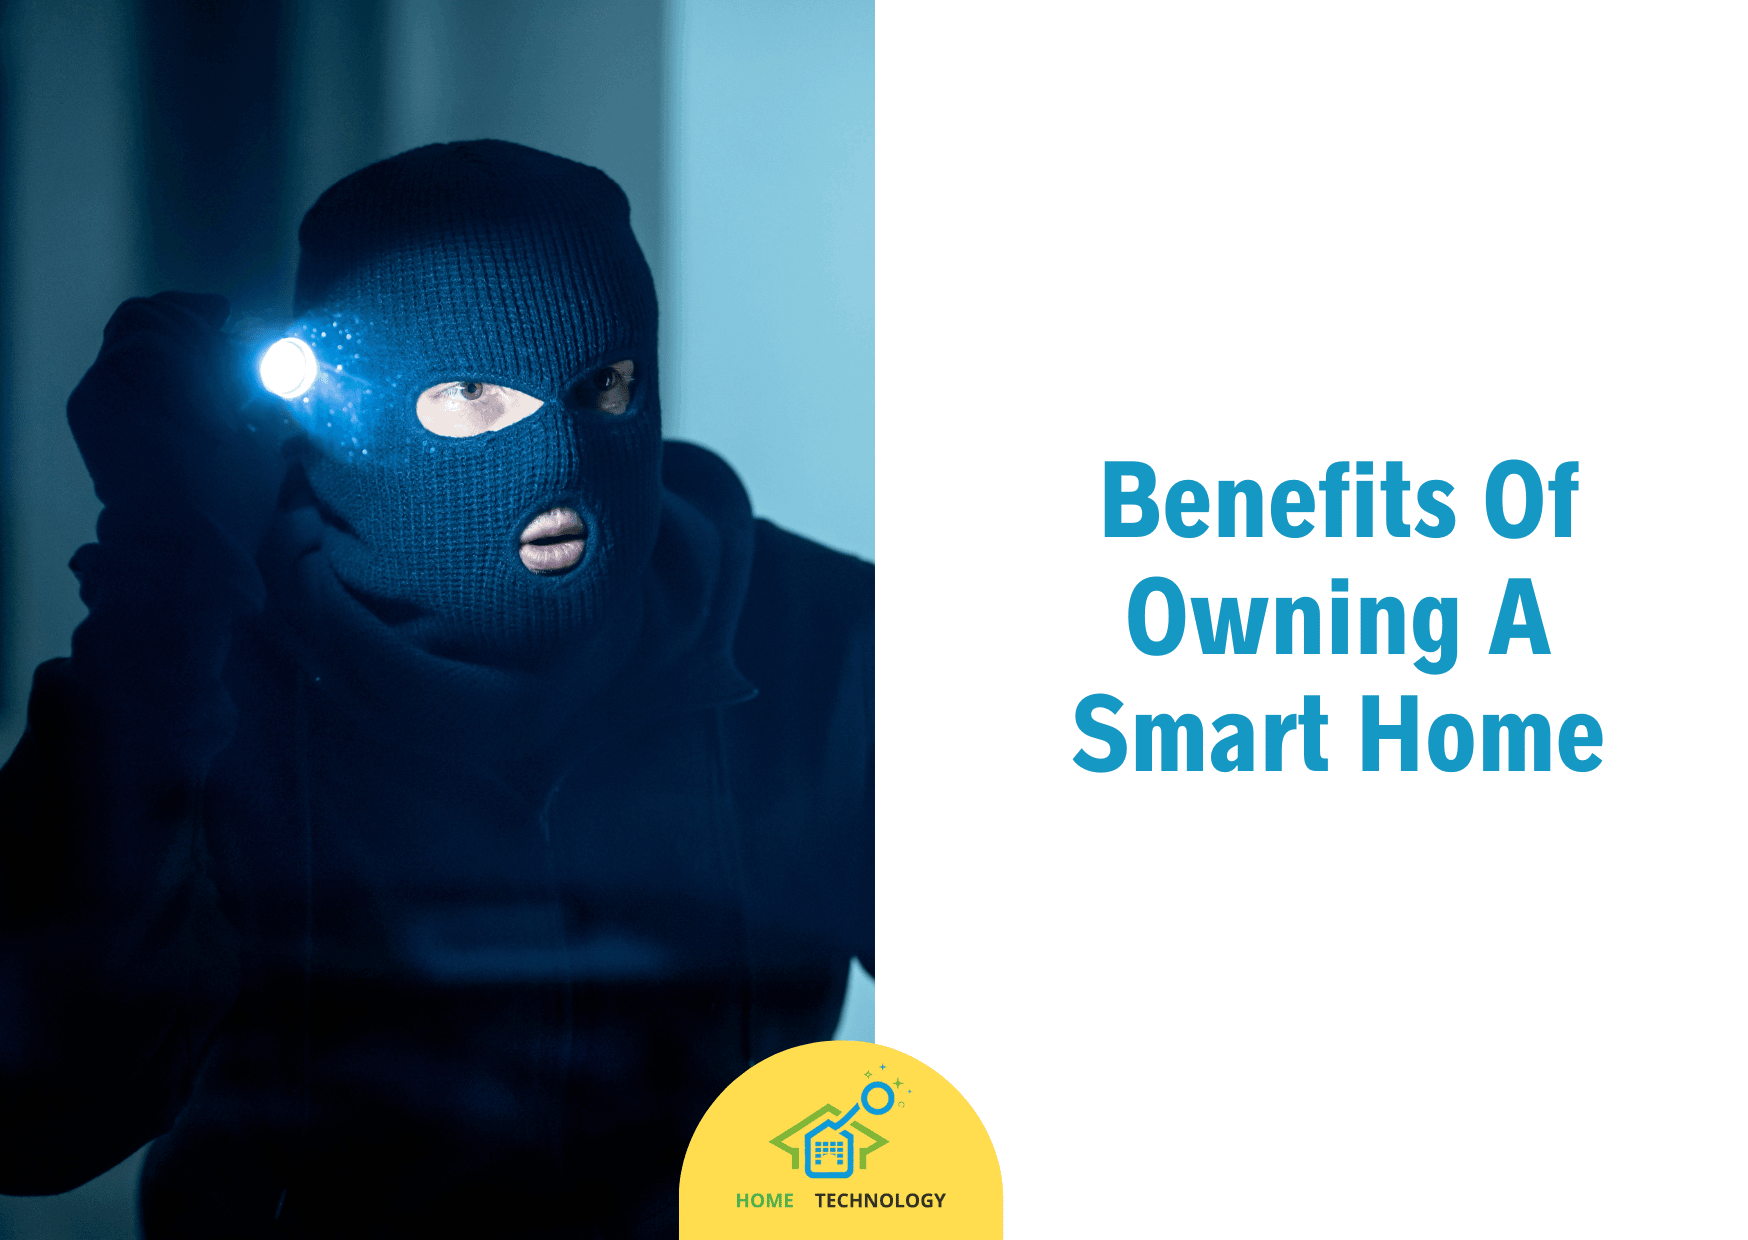 Smart home benefits for homeowners